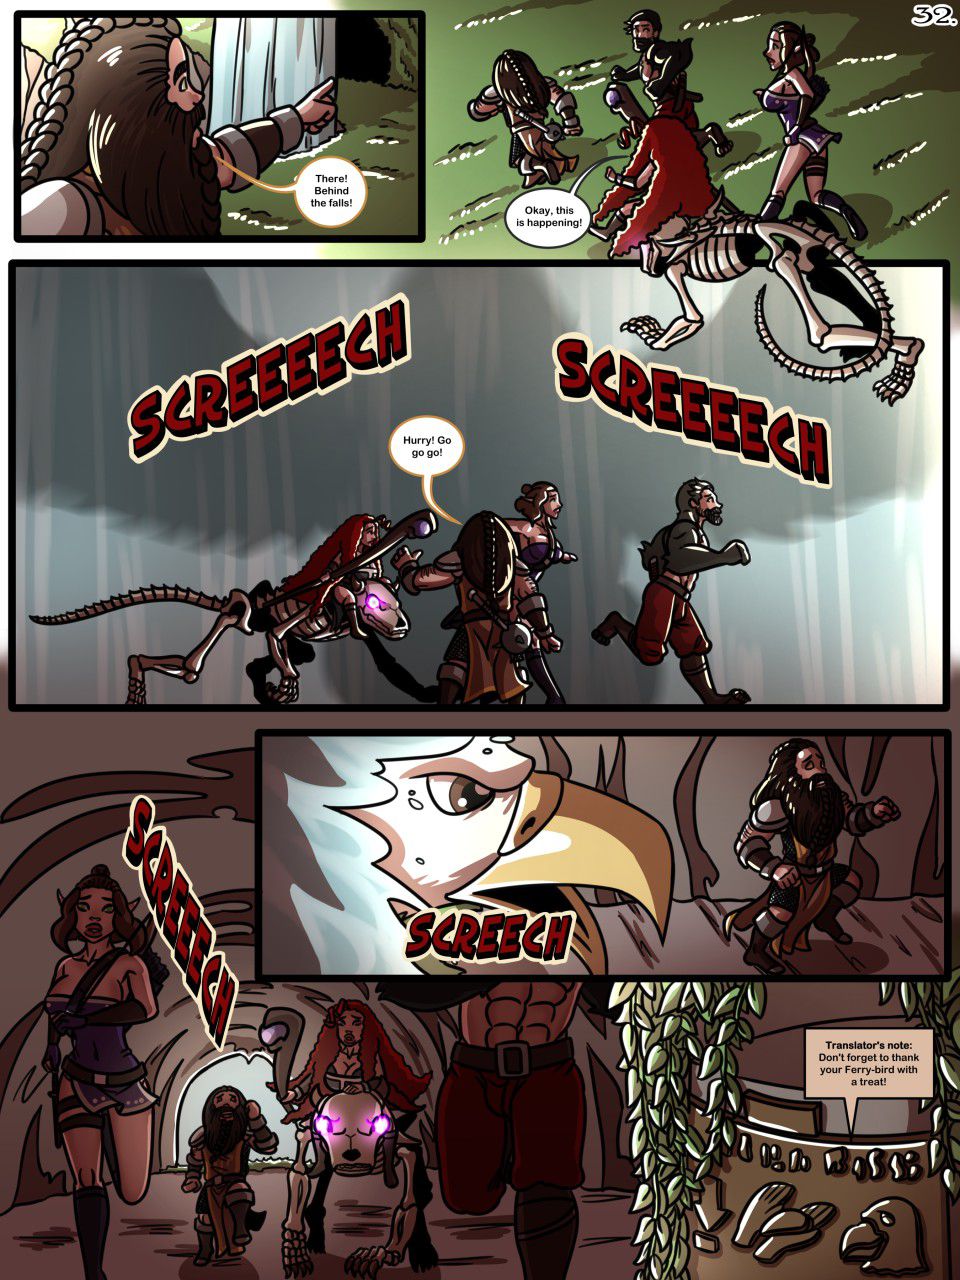 [JZerosk] To Kill a Warlord (ongoing) 32